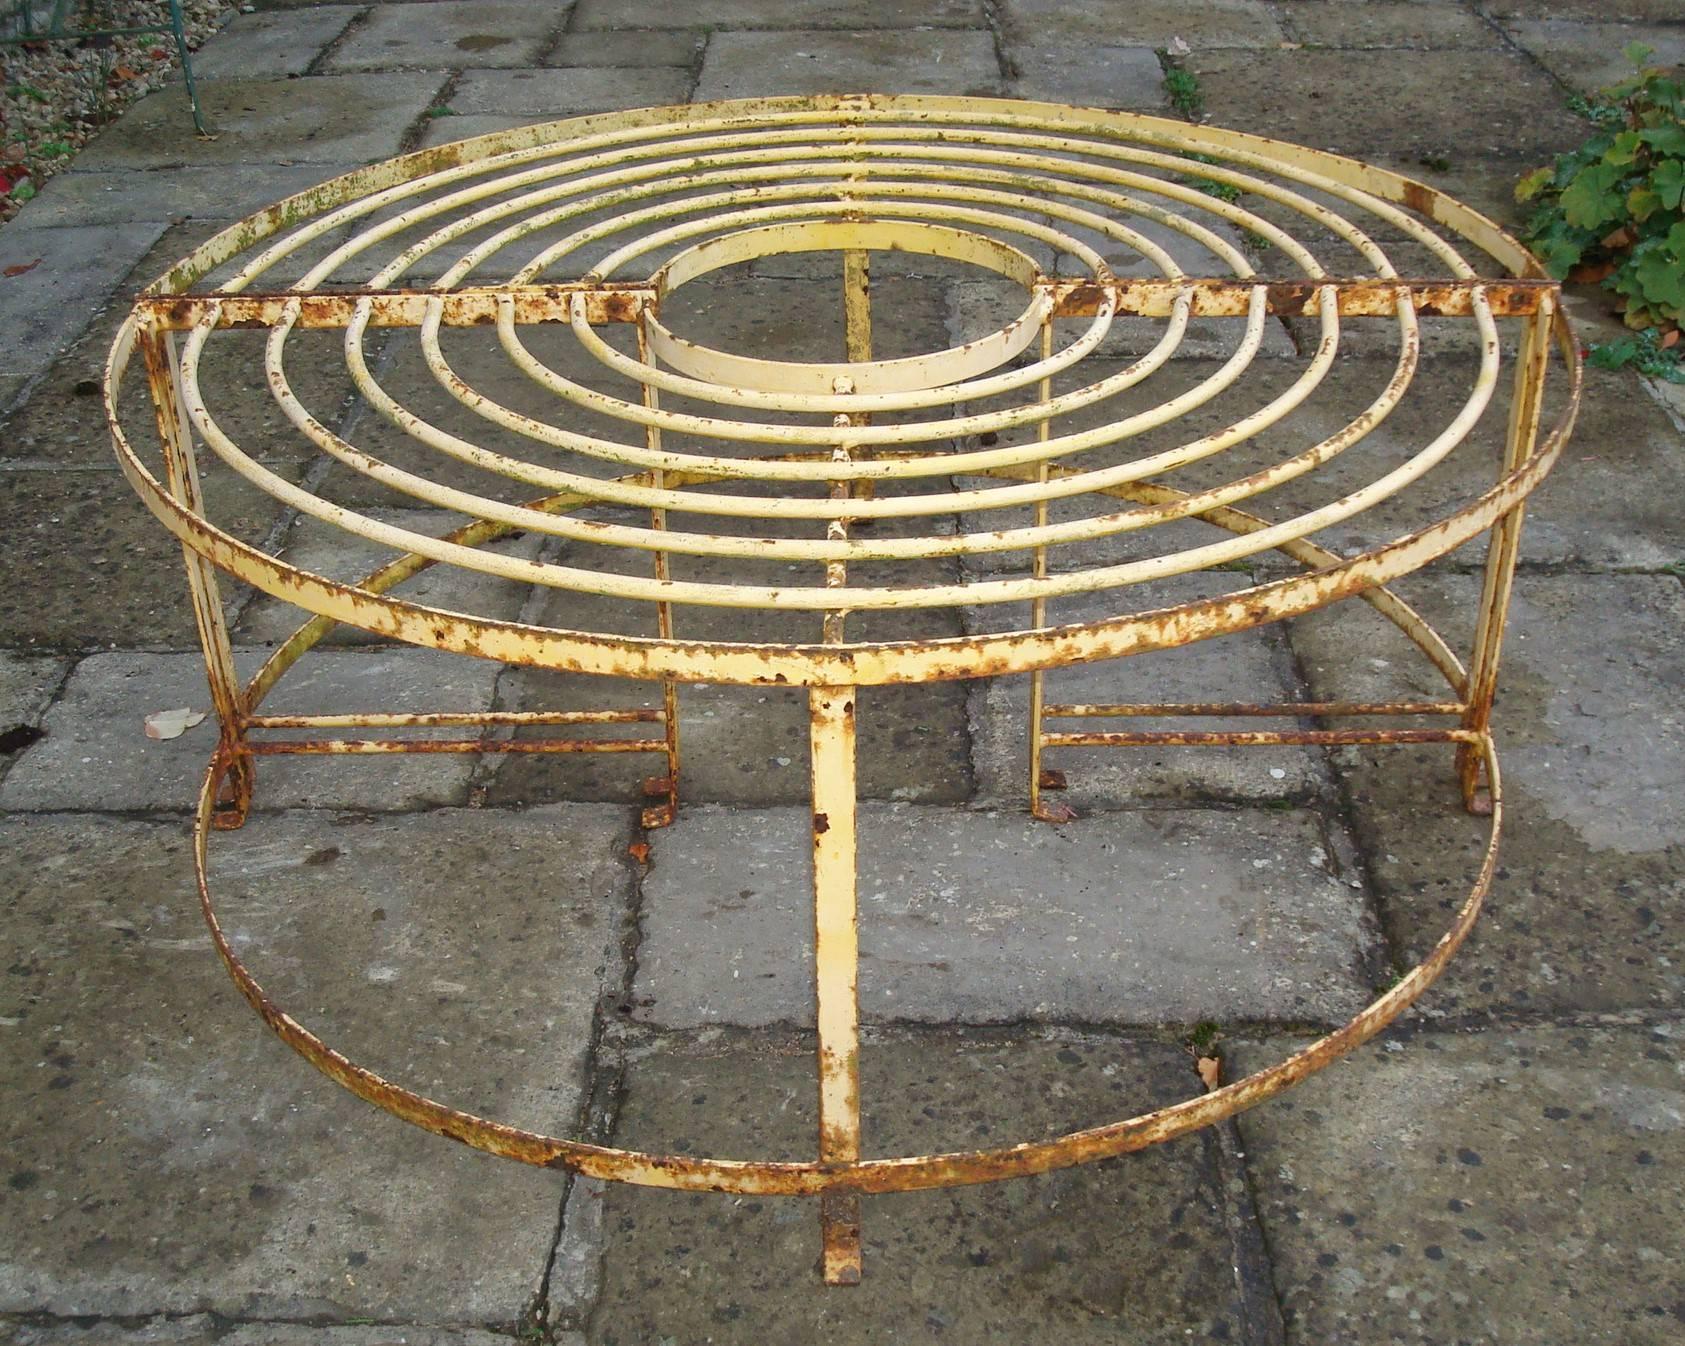 Early 20th century wrought iron garden tree seat, consisting of a pair of demilune seats with kickout feet. Can be used separate or together as a circular tree seat. Retaining much of the original ochre paint,
English, circa 1920.
Good